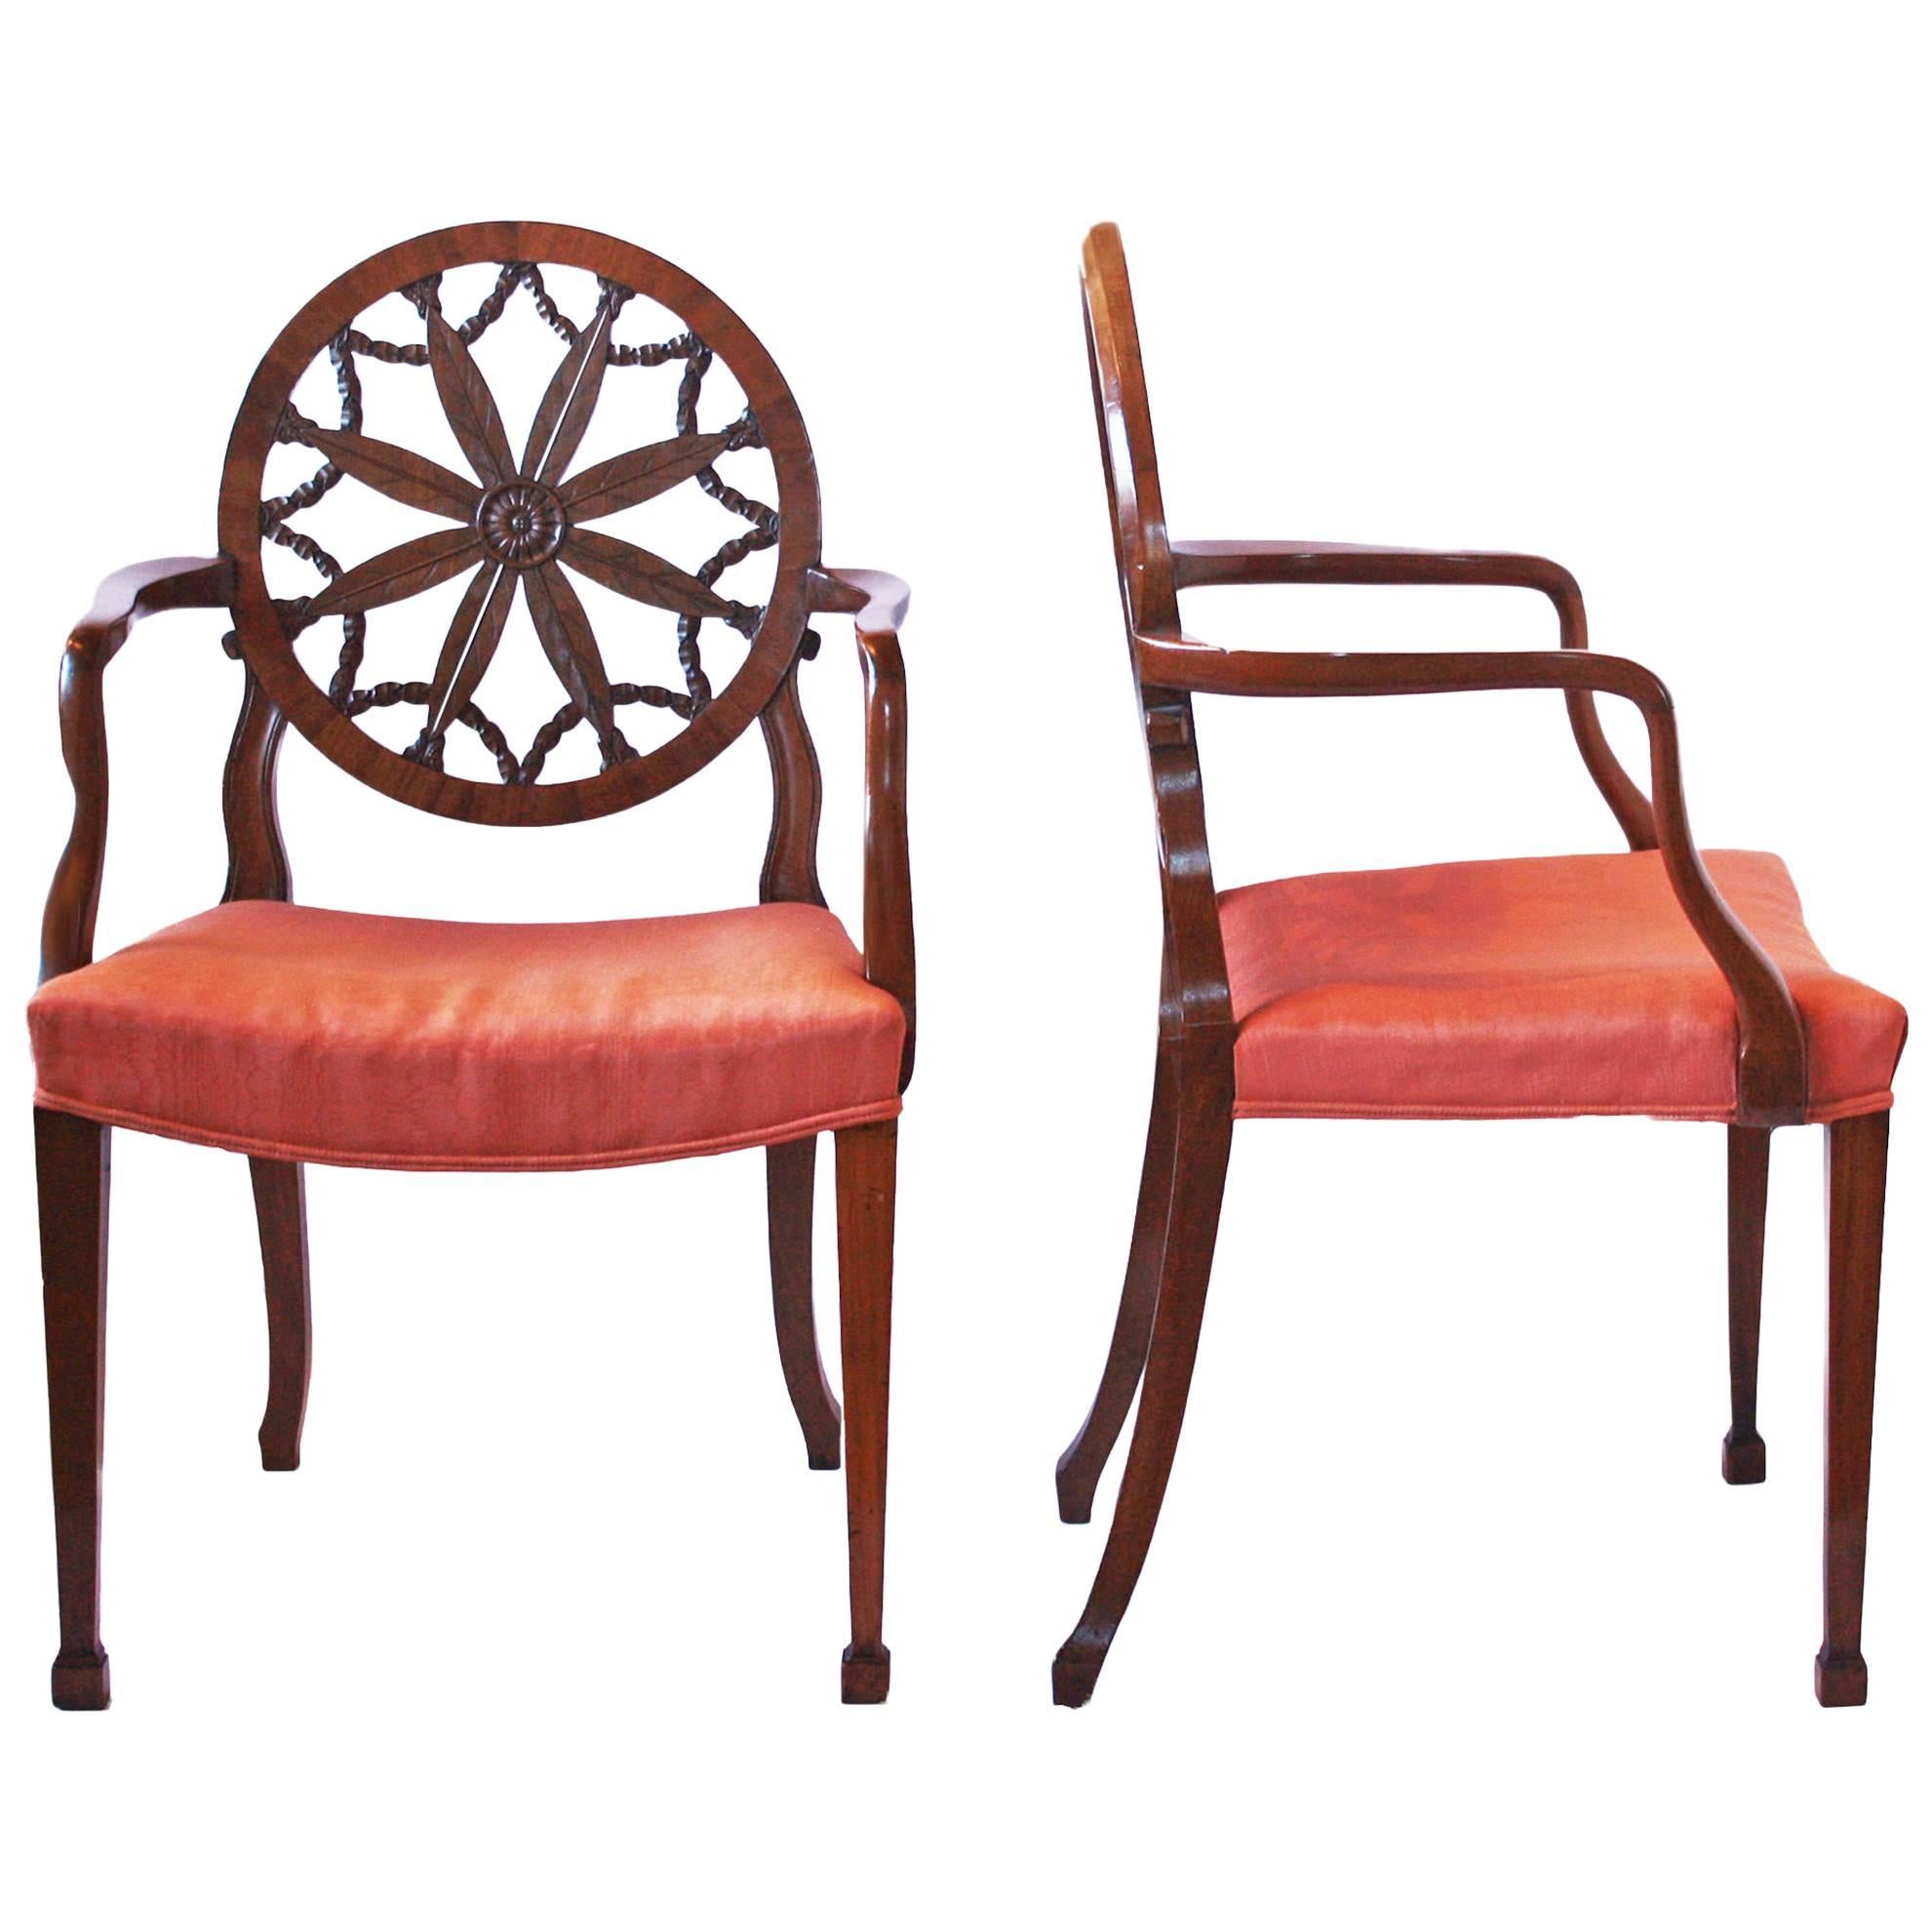 Pair of George III Mahogany Elbow Chairs in the Manner of Robert Adam